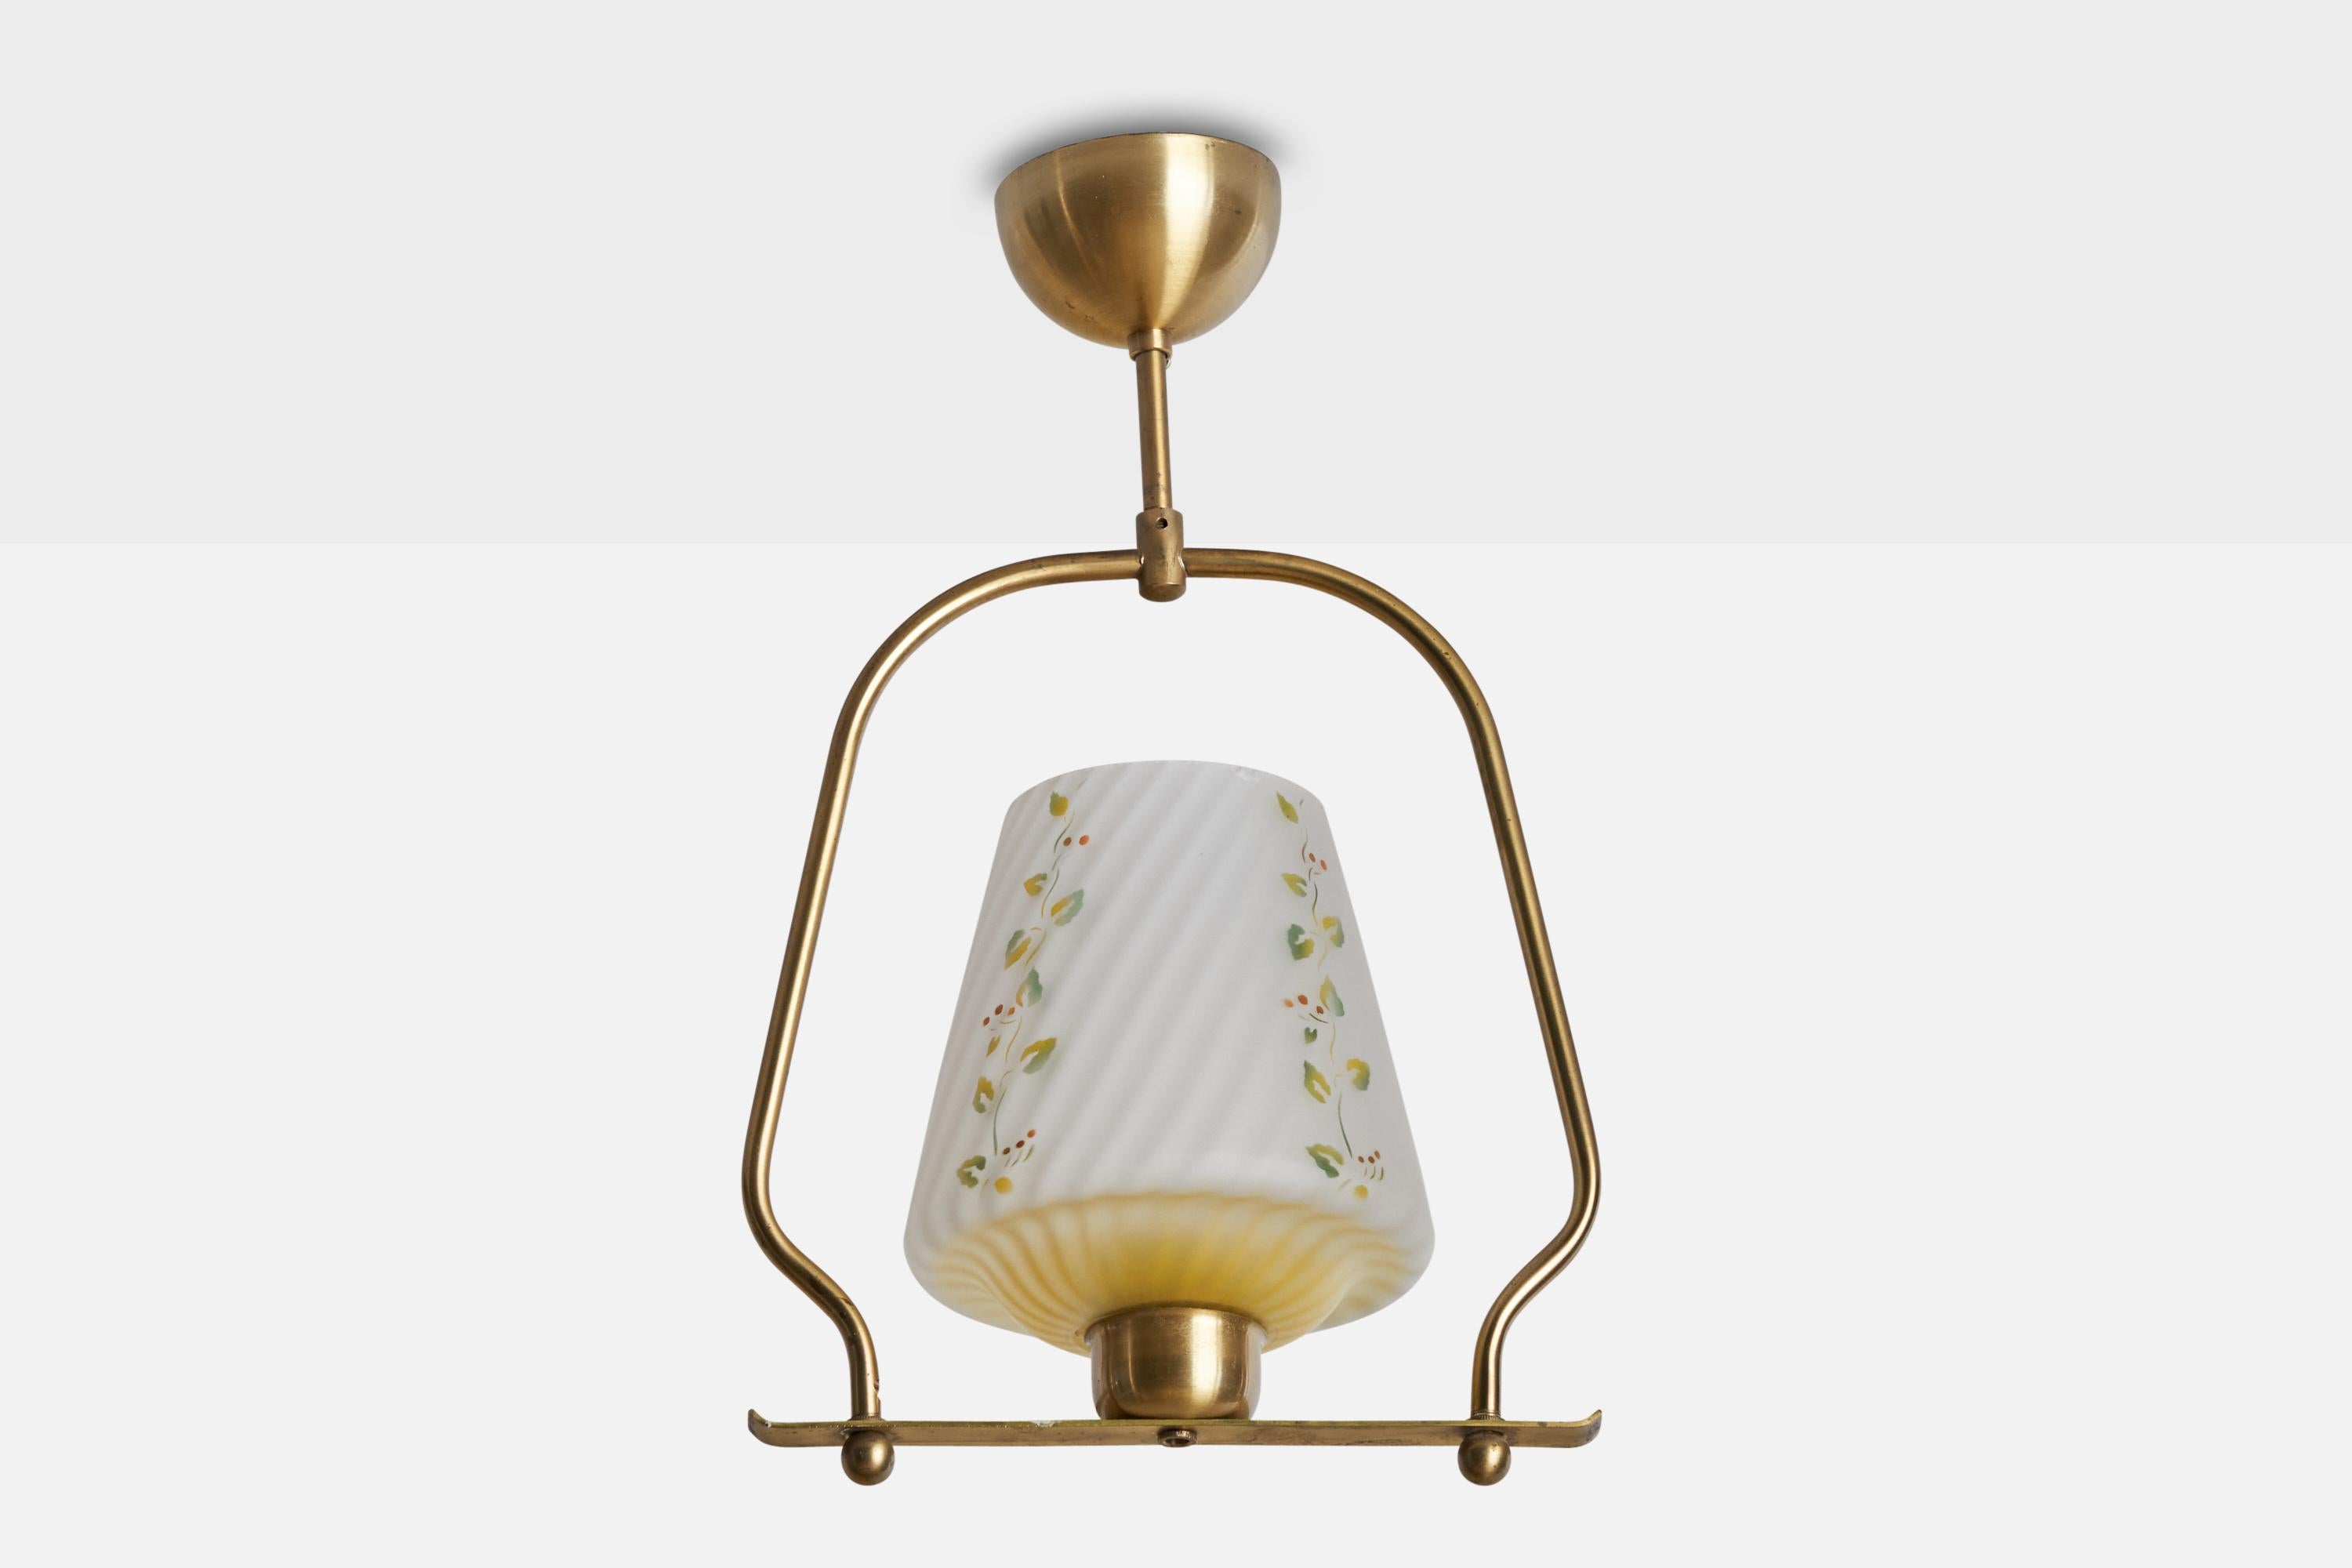 A brass and white floral printed glass pendant light designed and produced in Sweden, c. 1940s.

Dimensions of canopy (inches): 2”  H x 3.5” Diameter
Socket takes standard E-26 bulbs. 1 socket.There is no maximum wattage stated on the fixture. All